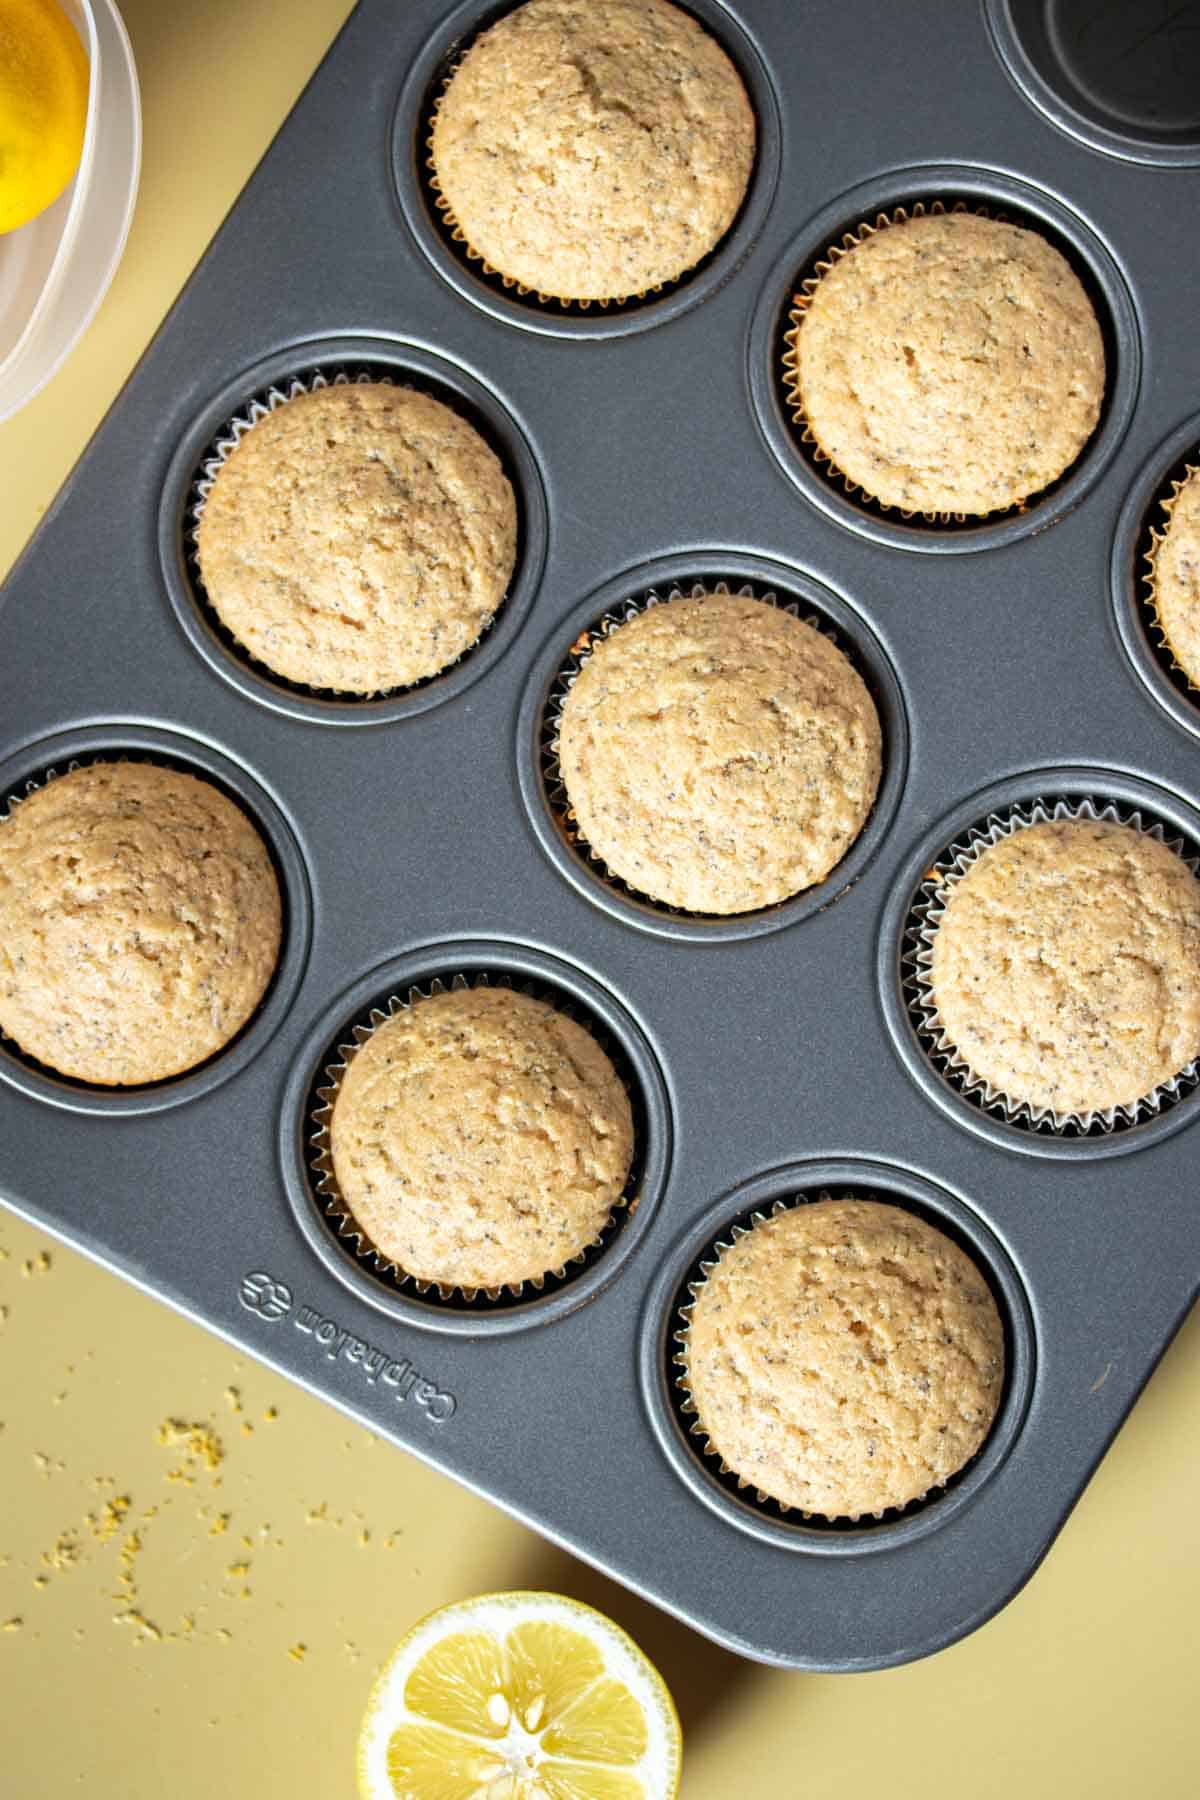 Top view of baked lemon poppy seed muffins in a muffin tin on a yellow surface.